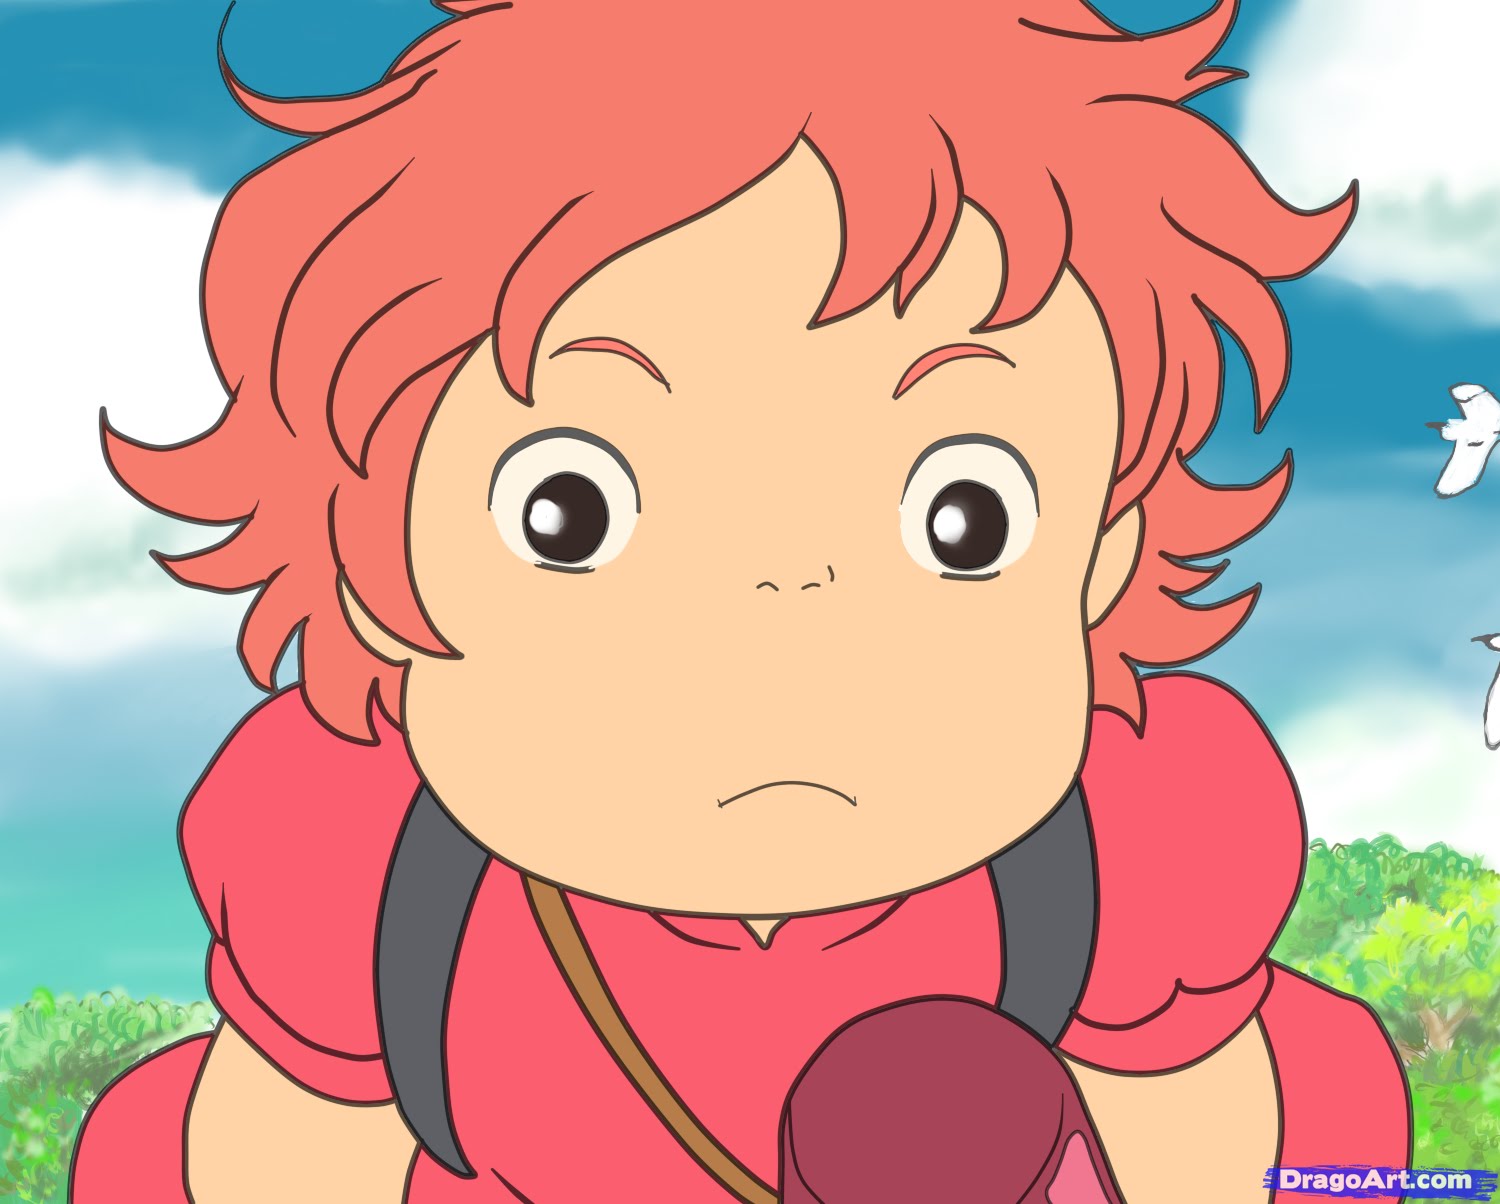 Ponyo wallpapers, Movie, HQ Ponyo pictures | 4K Wallpapers 2019